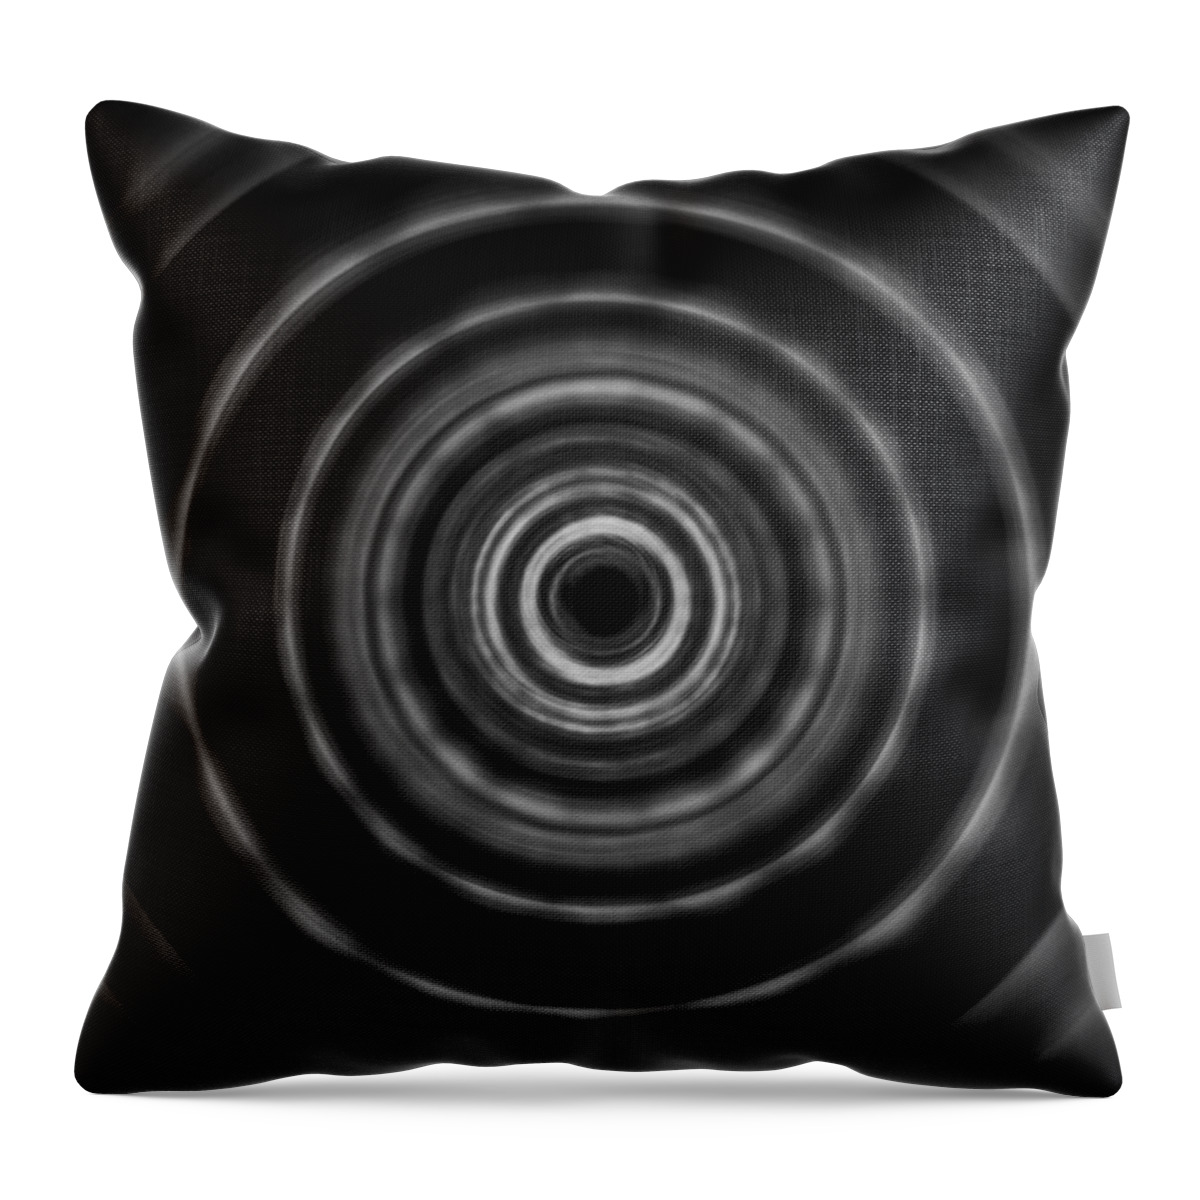 Black Throw Pillow featuring the painting Black And White Art - Mesmerize - By Sharon Cummings by Sharon Cummings